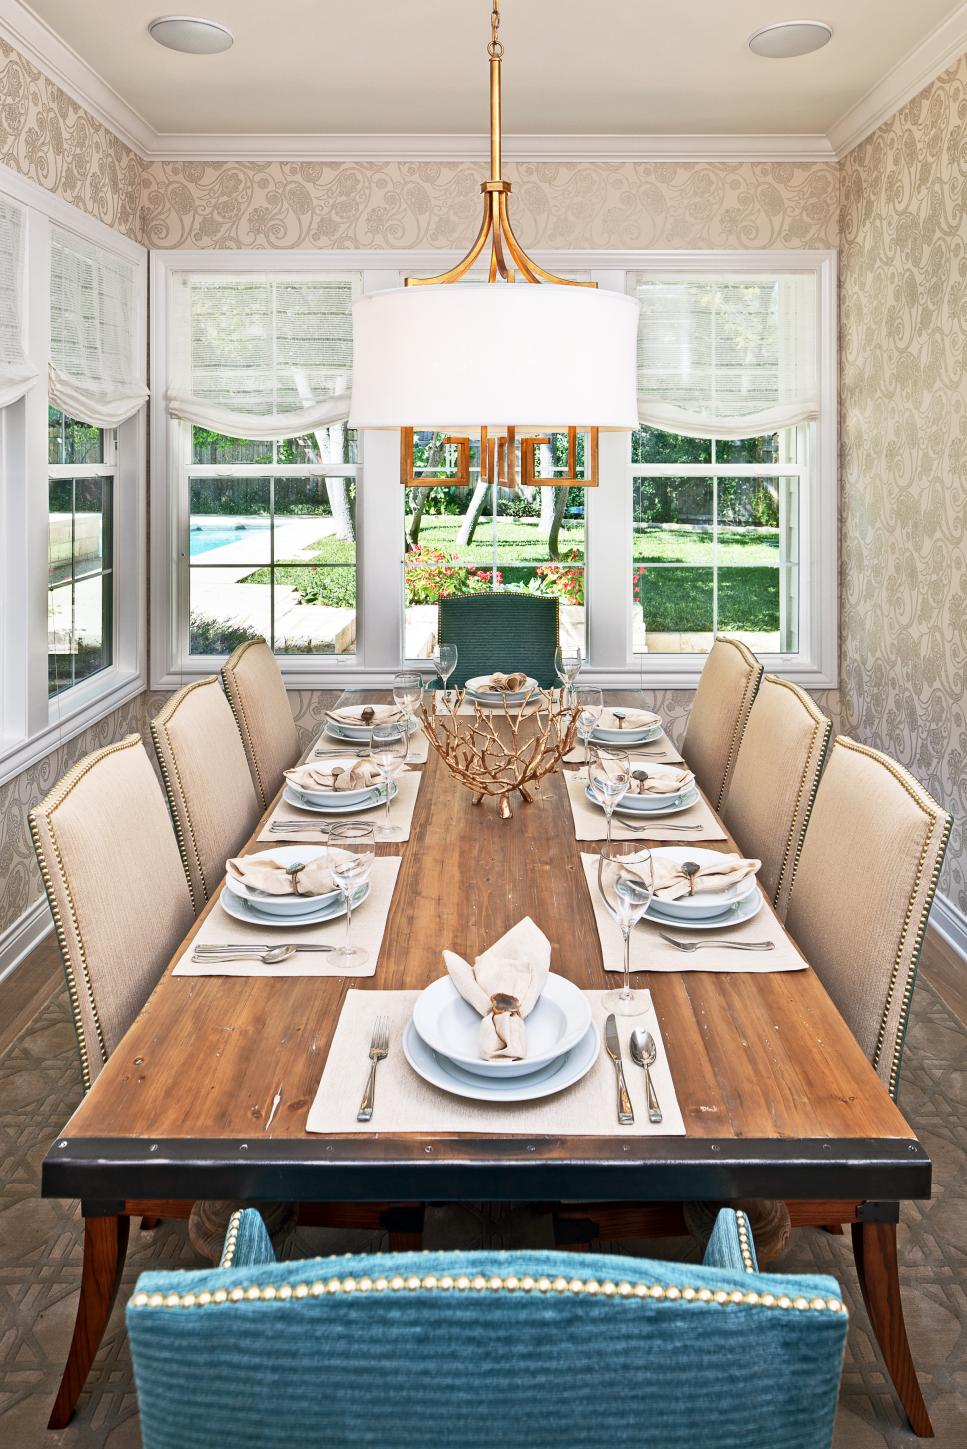 Contemporary Country Dining Room With Gorgeous Wood Table | HGTV